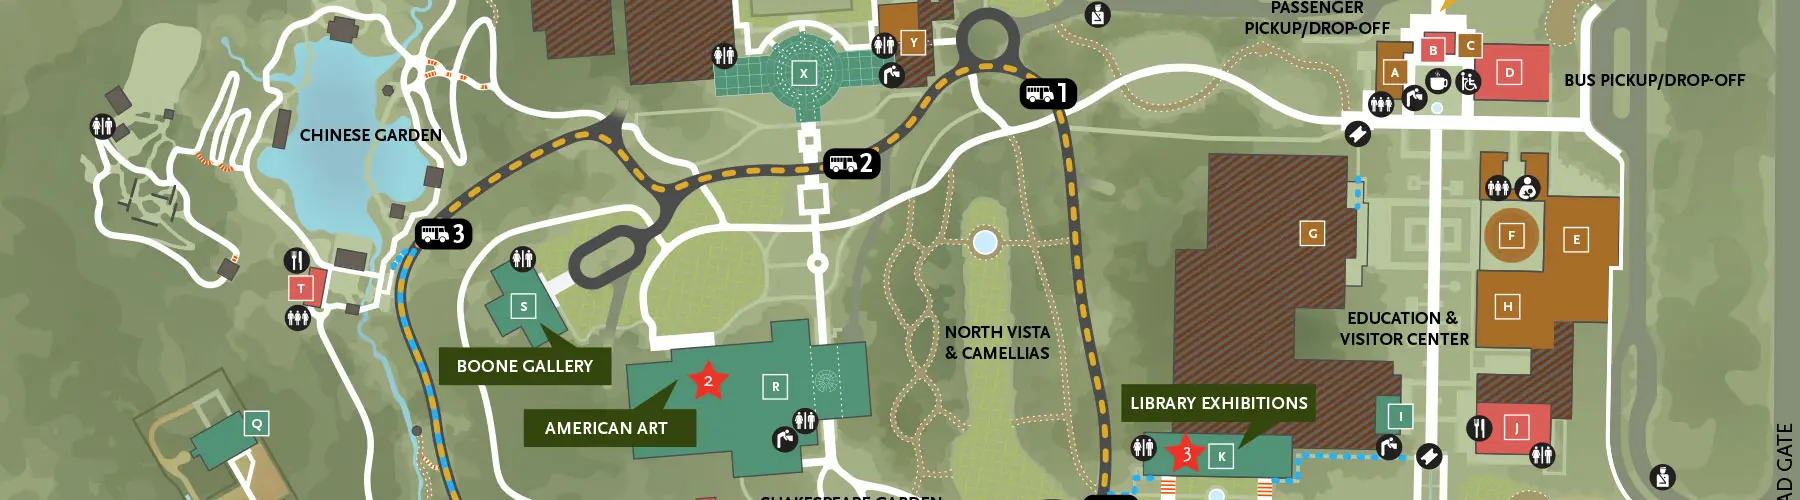 A visitor map shows paths, walkways, buildings, and other features.